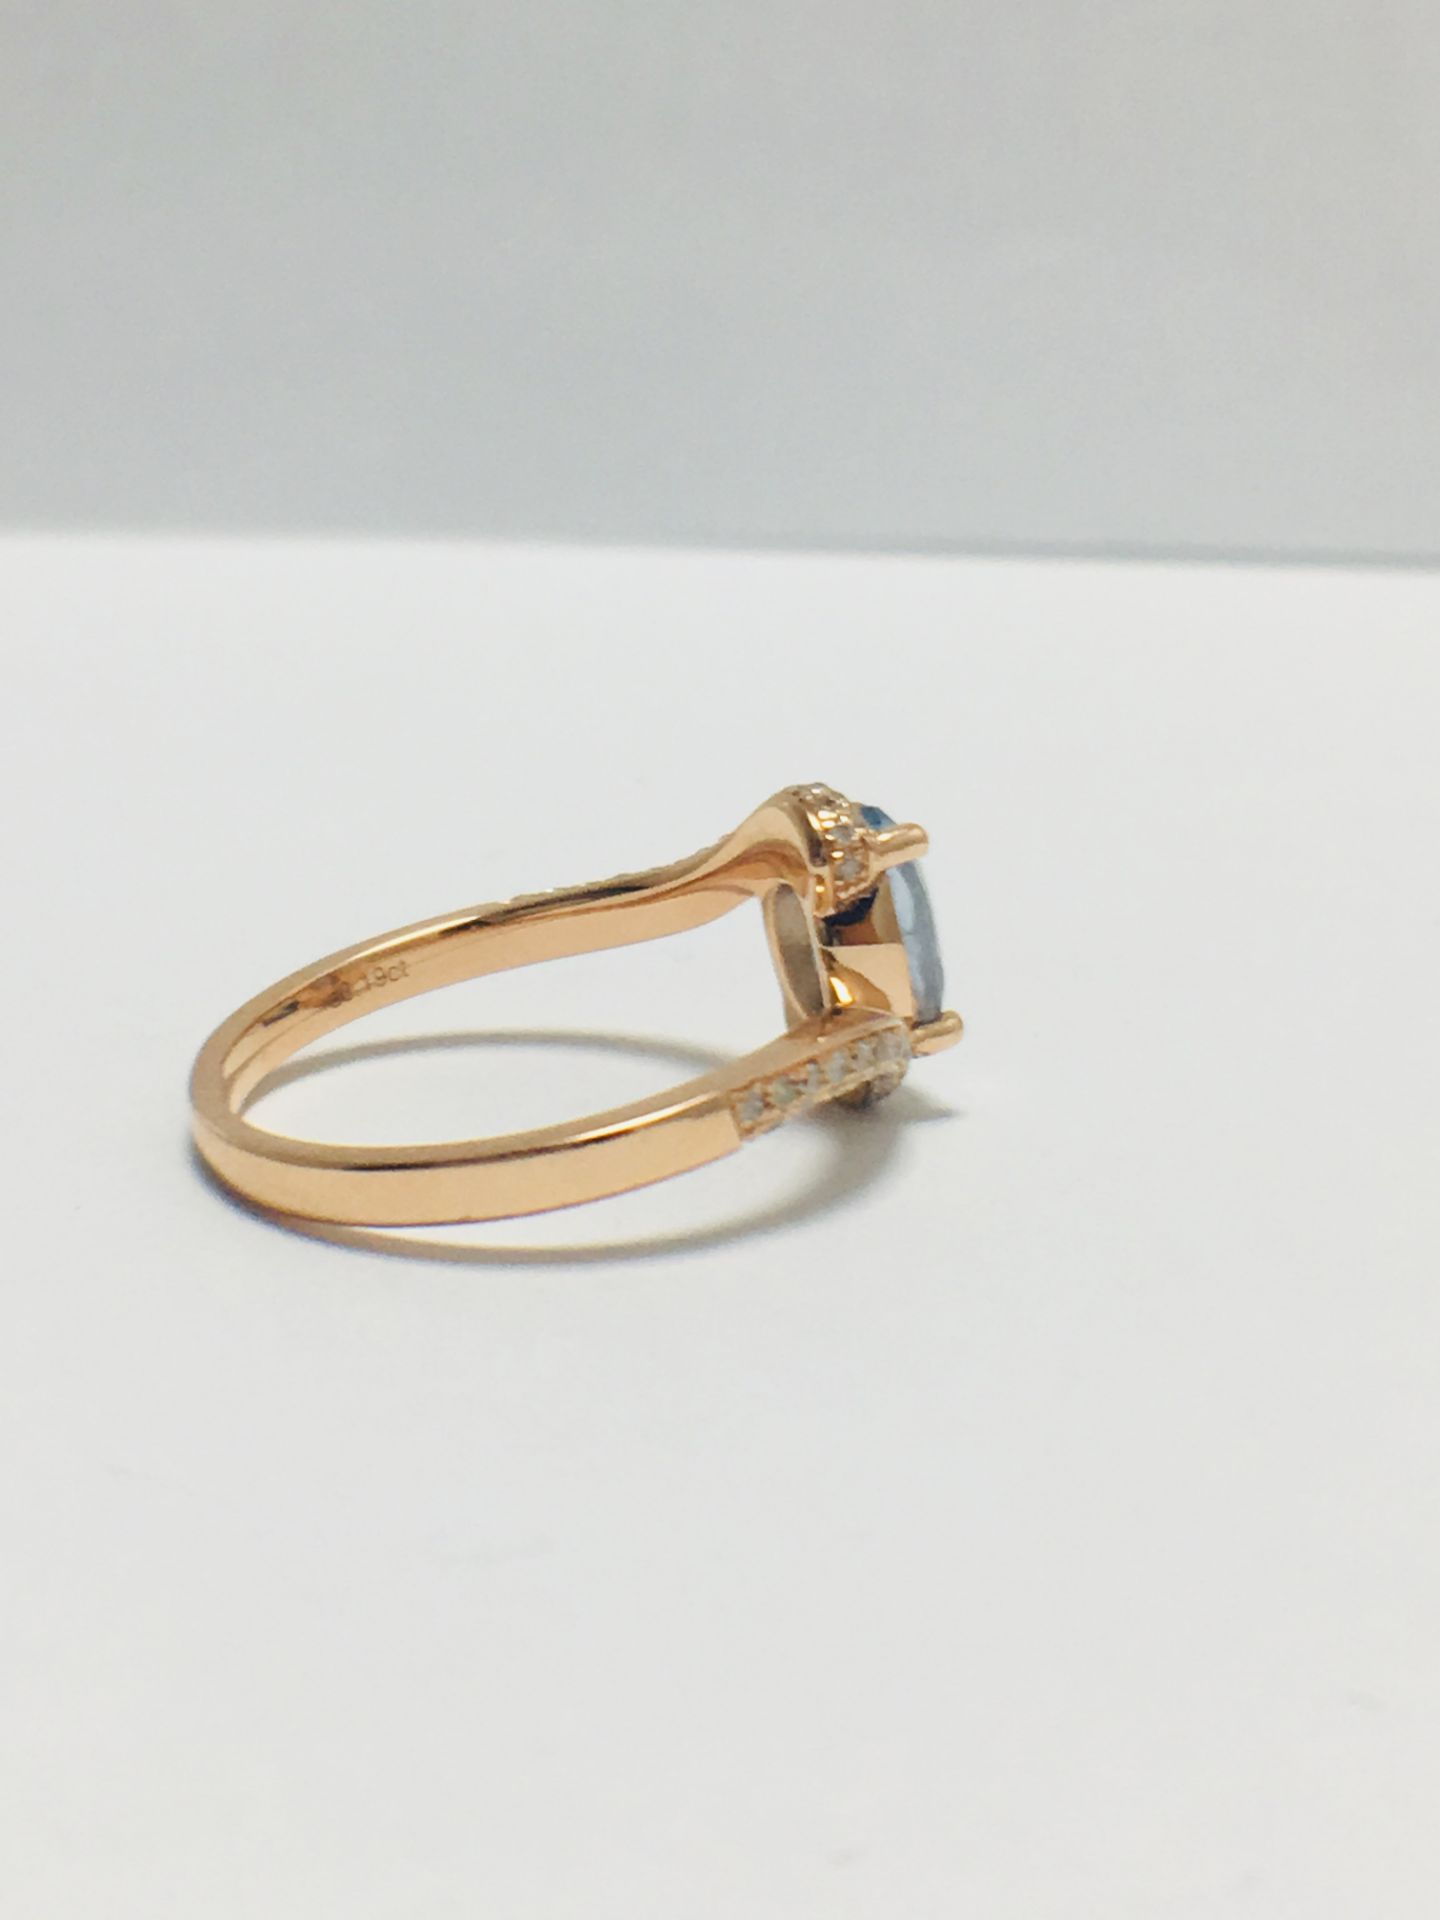 14ct Rose Gold Sapphire and Diamond ring - Image 5 of 9